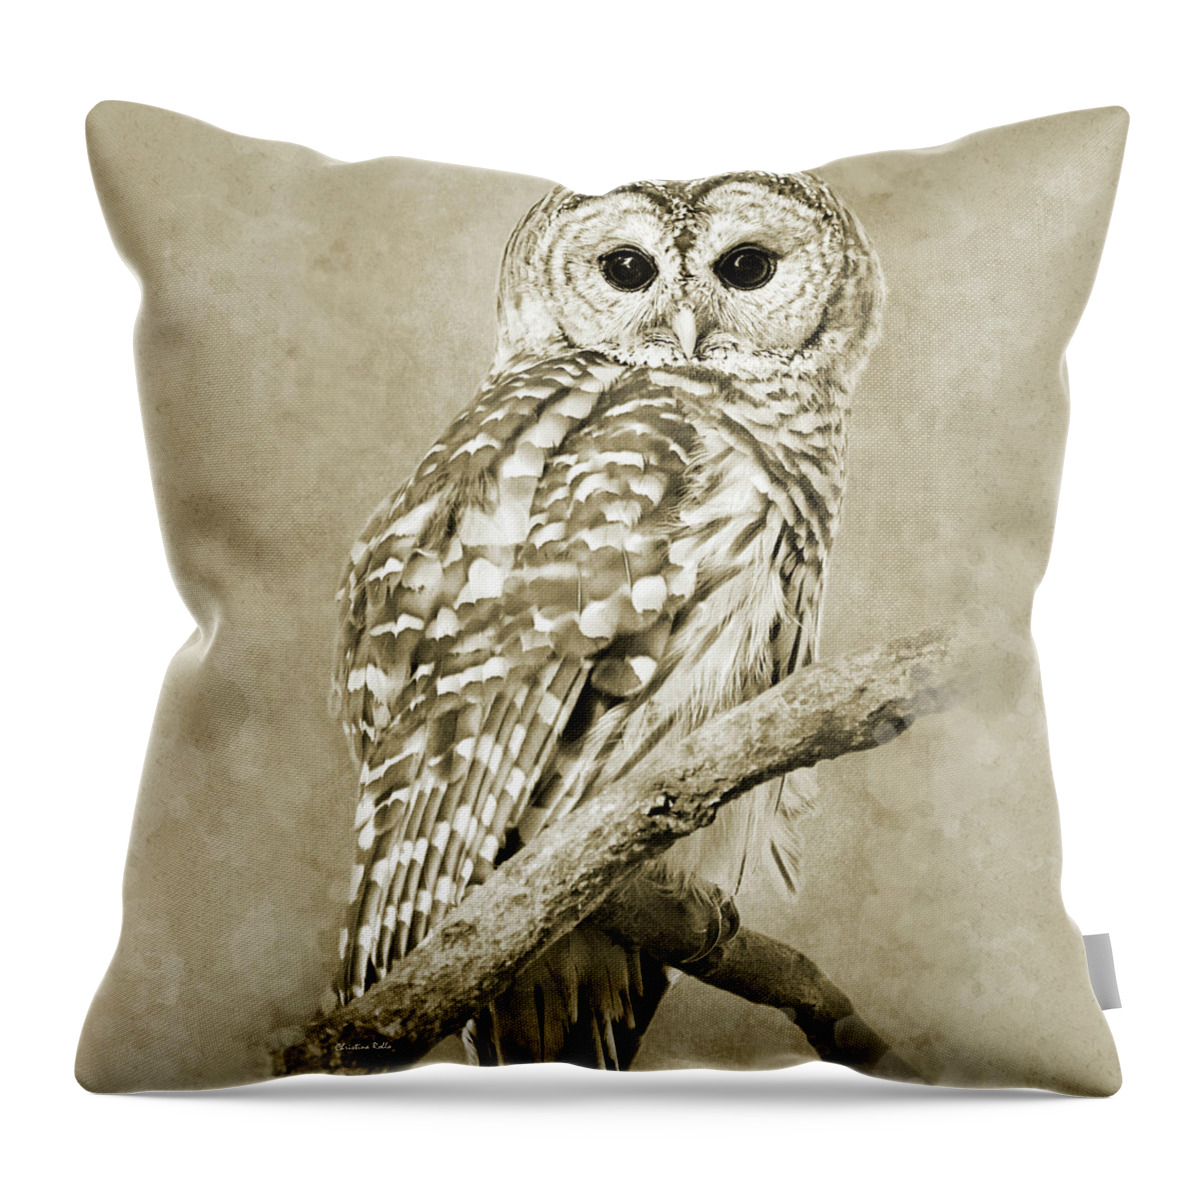 Owl Throw Pillow featuring the photograph Sepia Owl by Christina Rollo